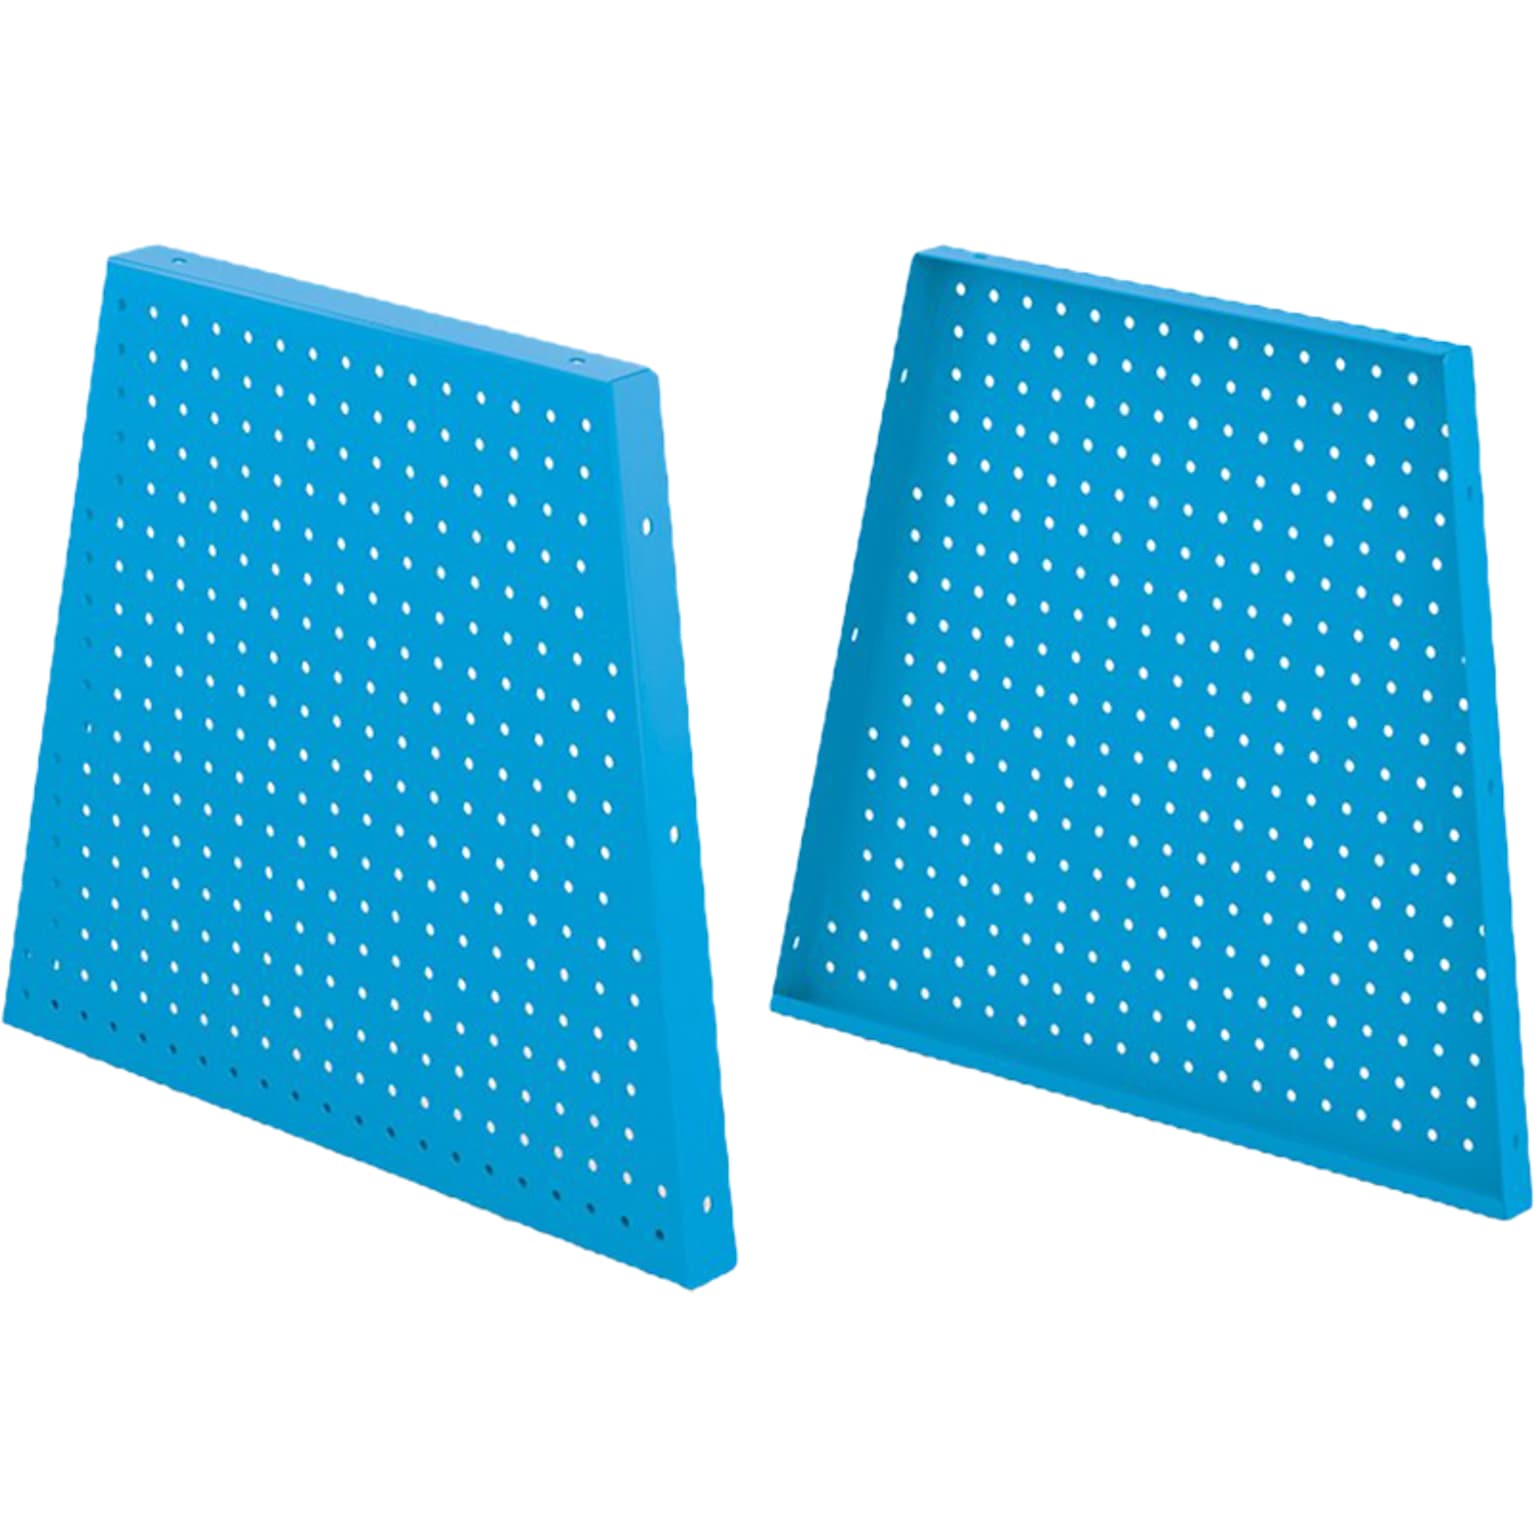 MooreCo Hierarchy 22 Peg Side Panel, Blue, 2/Pack (52990-Blue)